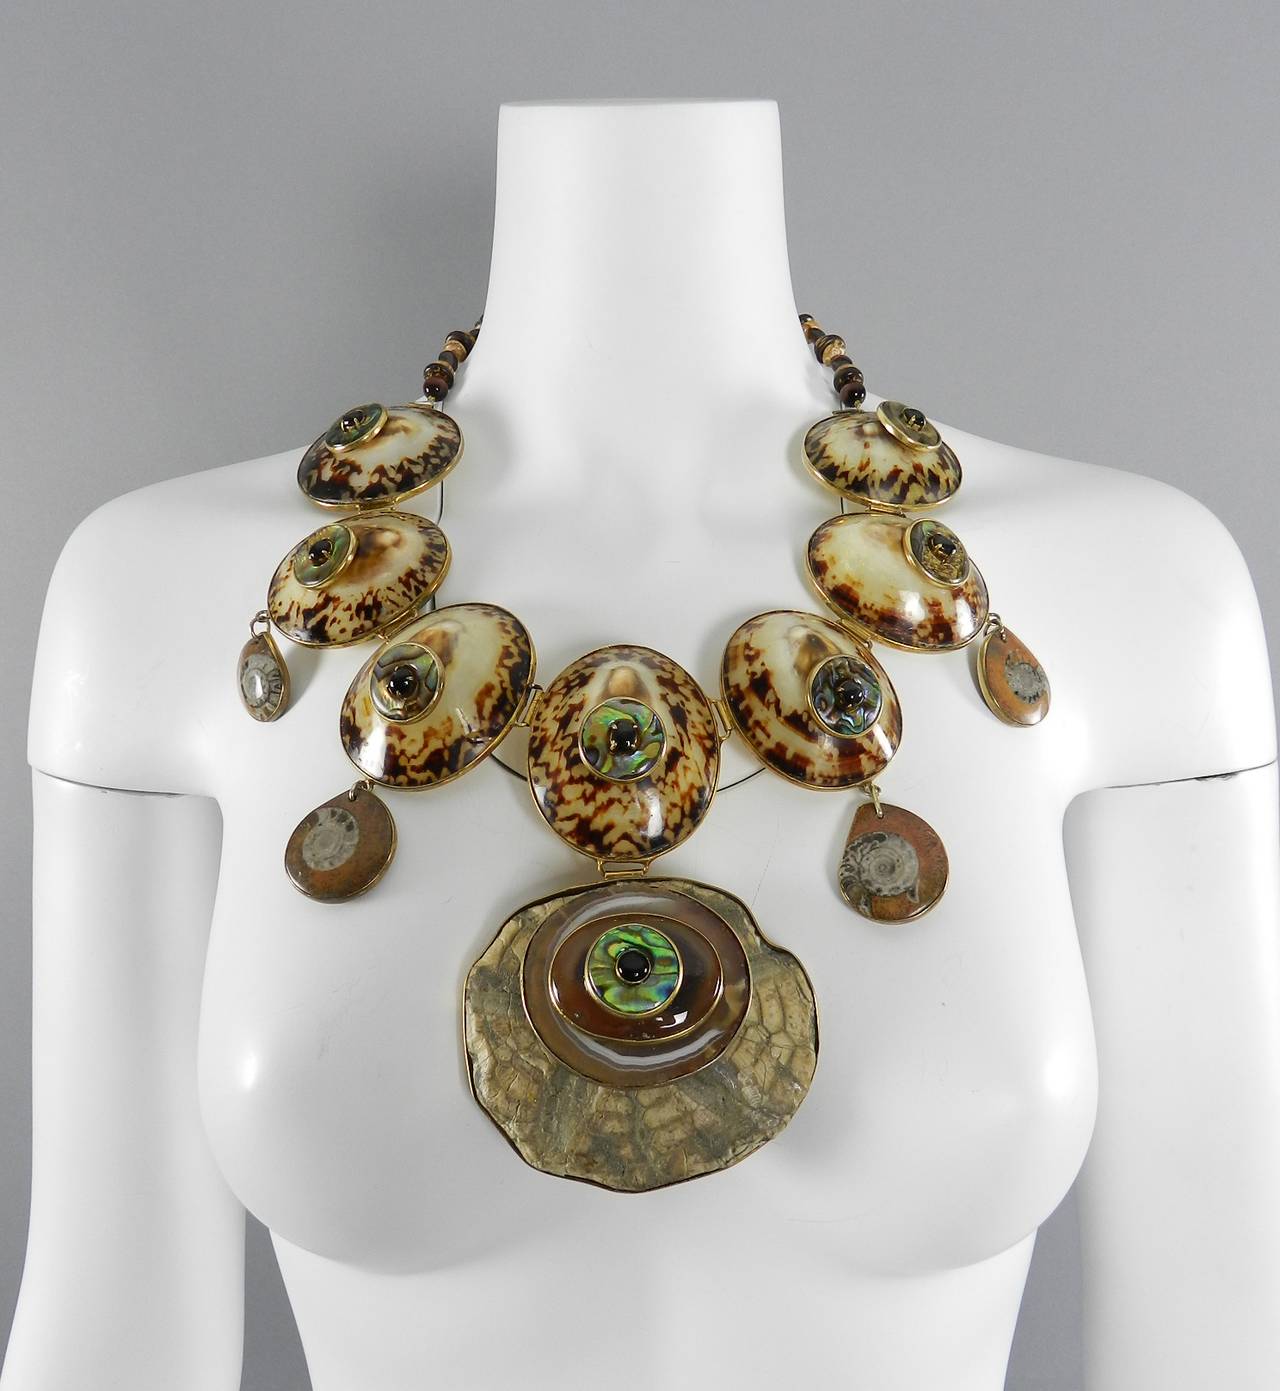 Tony Duquette Hollywood Regency collector's talisman statement necklace in original presentation box. Please see our other listings for additional pieces from this collection. 

Accompanied by the original purchase receipt from 1999, which